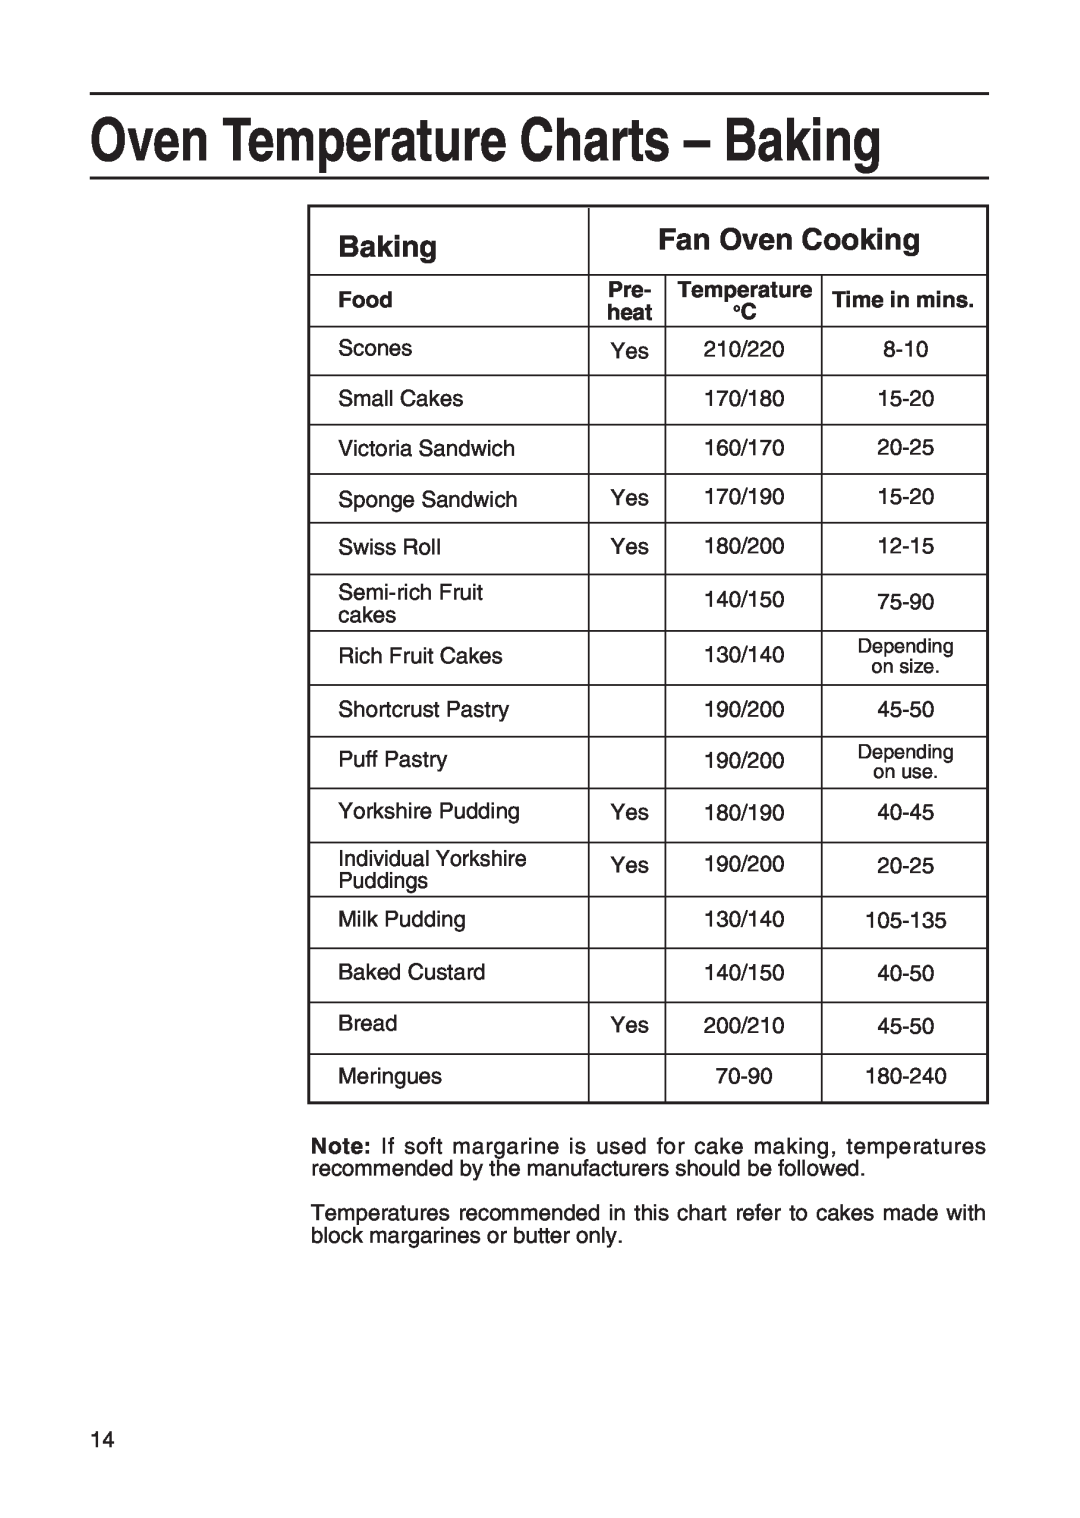 Hotpoint EG21 & EG22, EG20 manual Oven Temperature Charts - Baking, Fan Oven Cooking 